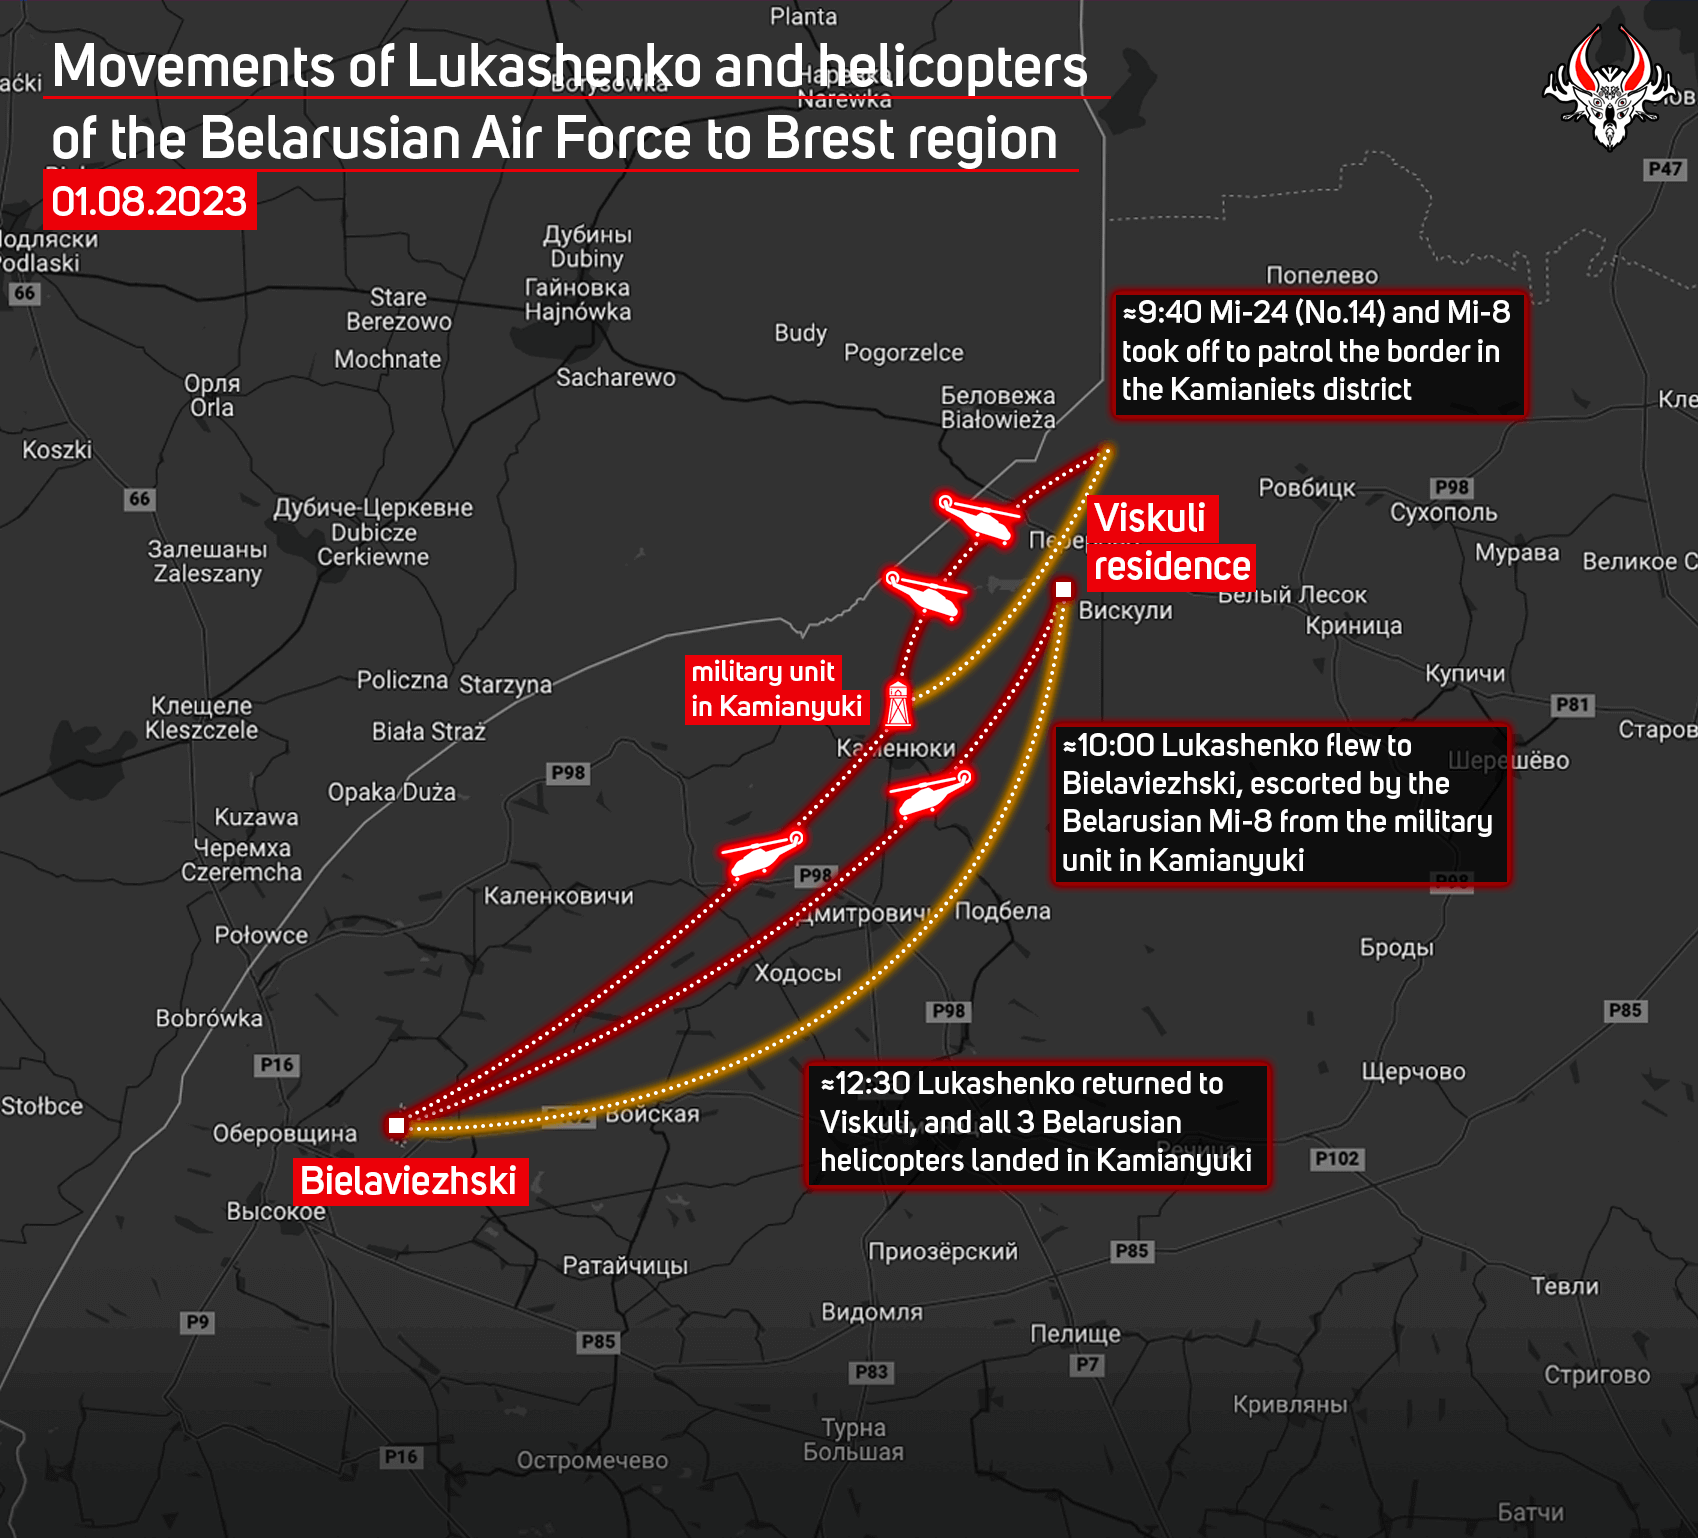 Movements of Lukashenko and helicopters of the Belarusian Air Force in Brest region (01.08.2023)